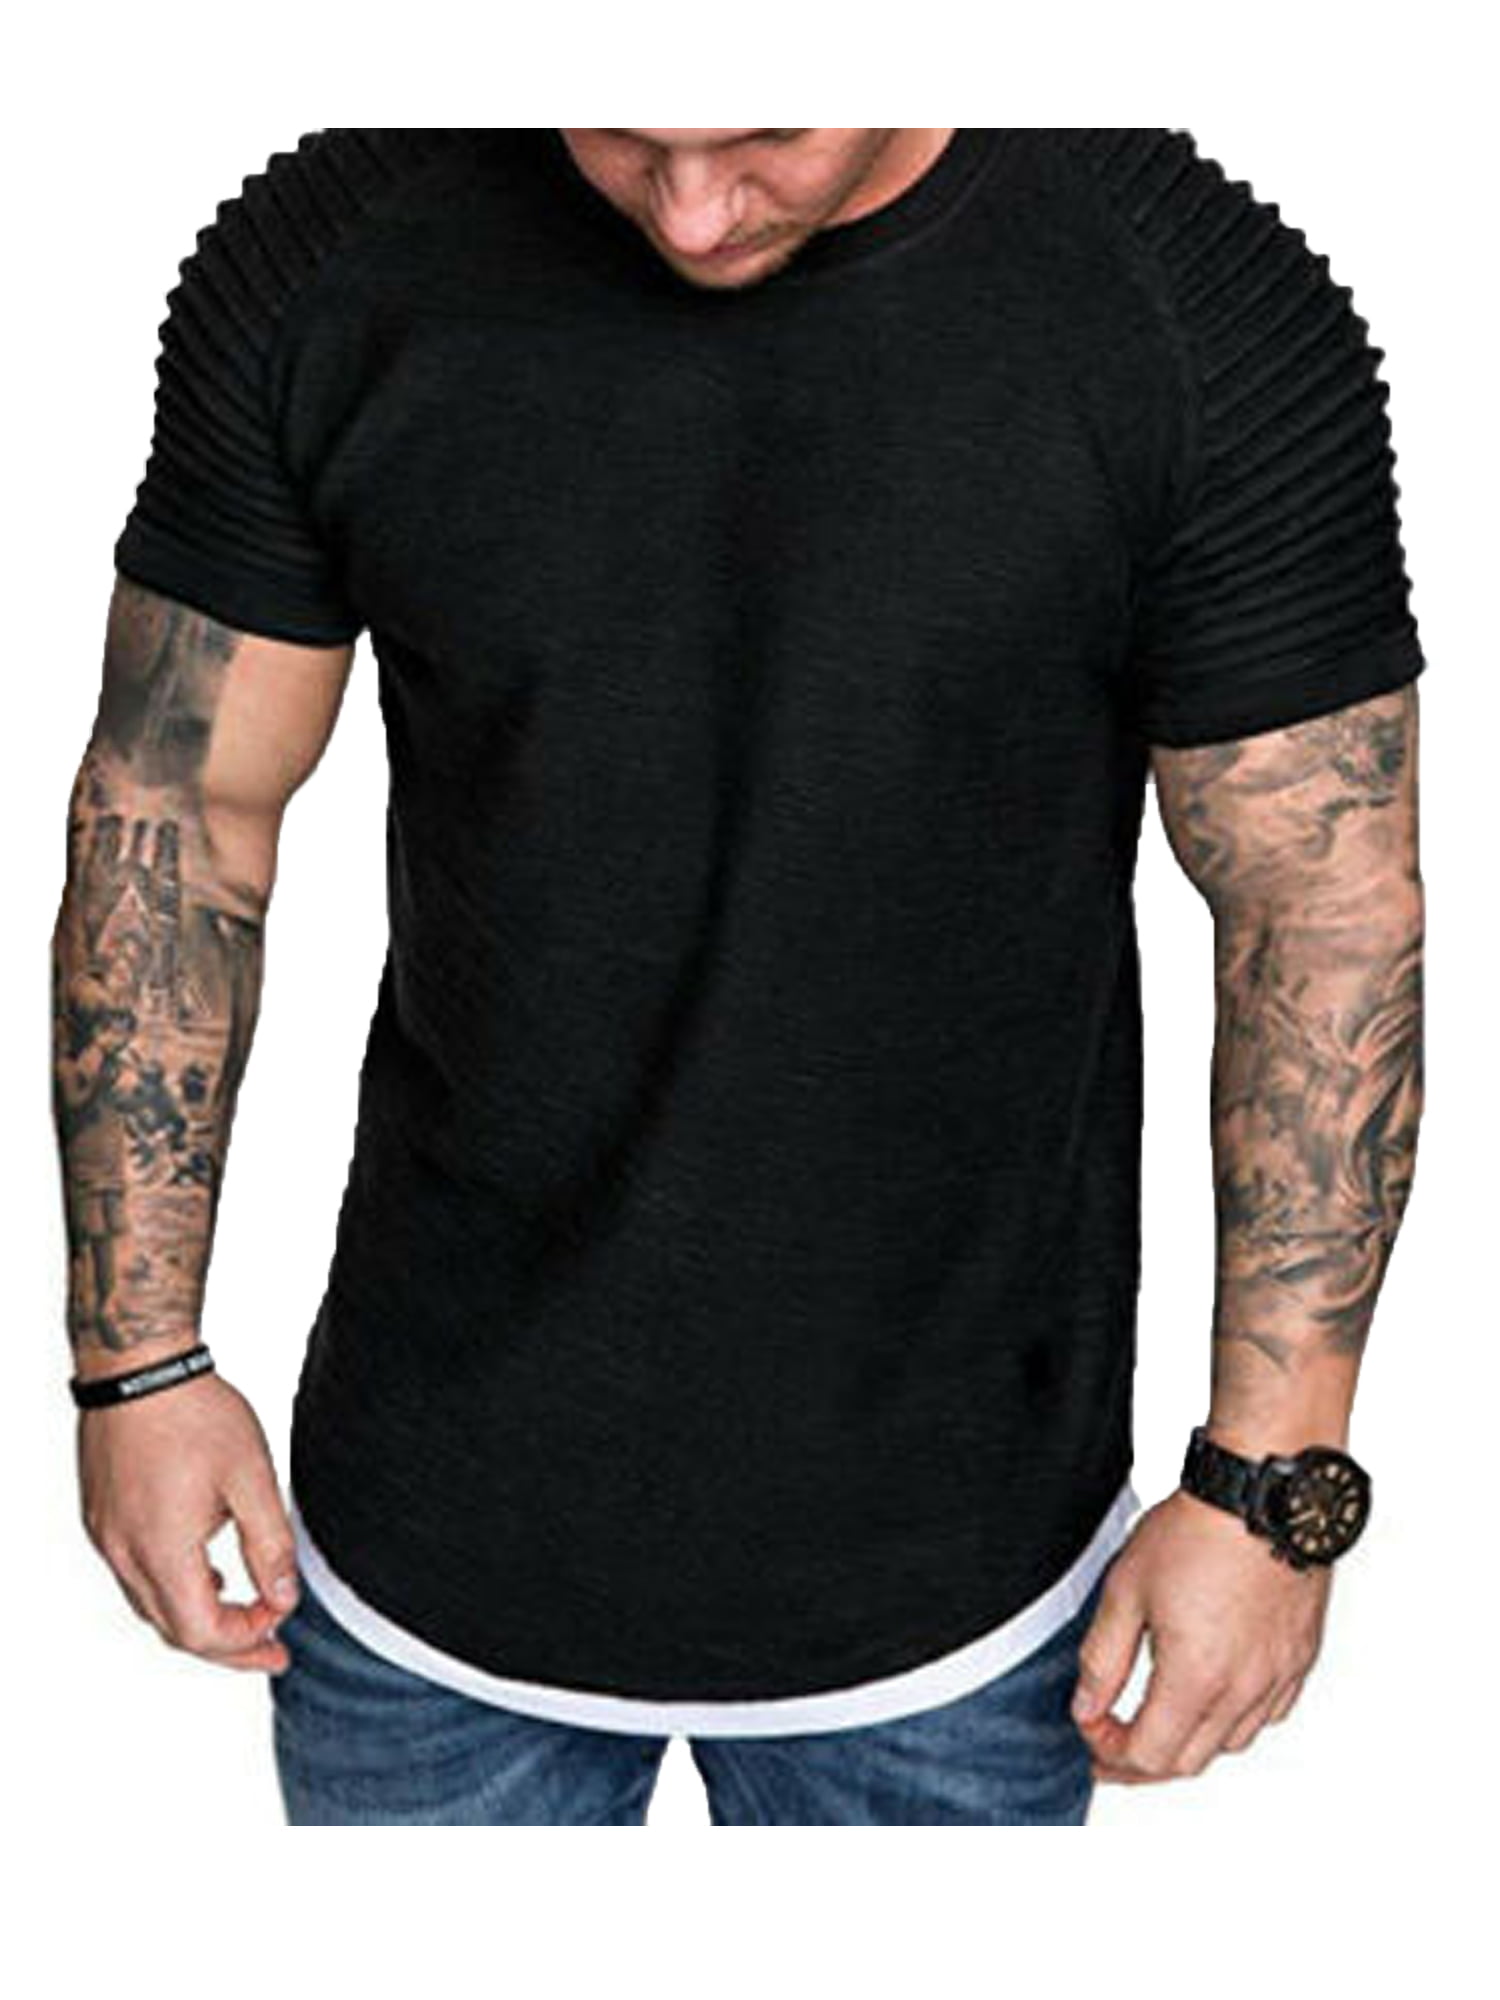 Diconna - Diconna Men Short Sleeve T-shirt Wrinkled Casual Blouse ...